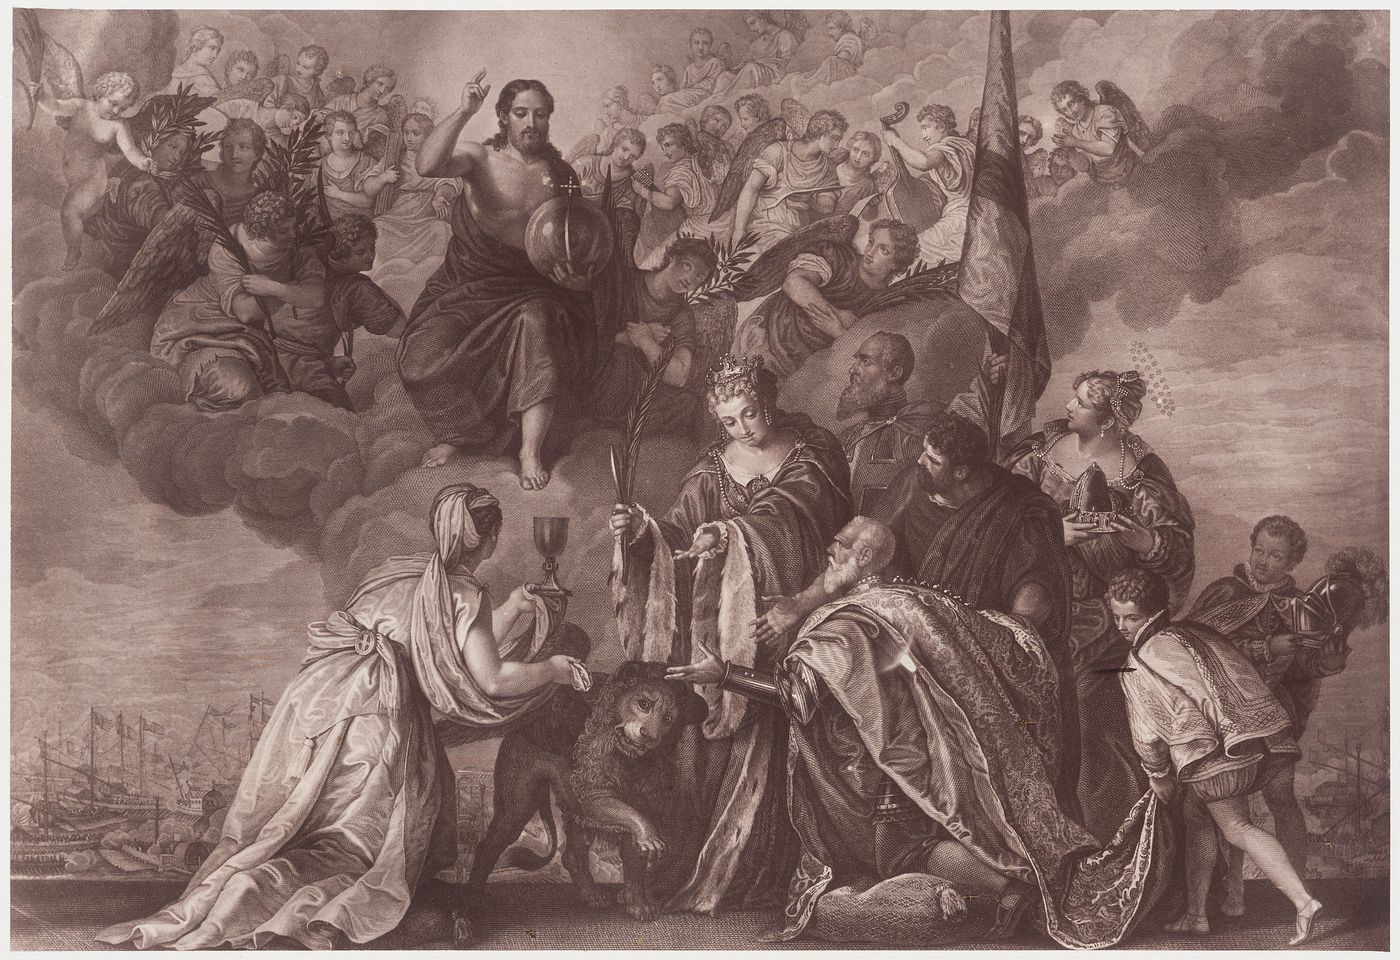 Photograph of the "Thanksgiving for Lepanto" by Veronese, Palazzo ducale [Doge's Palace], Venice